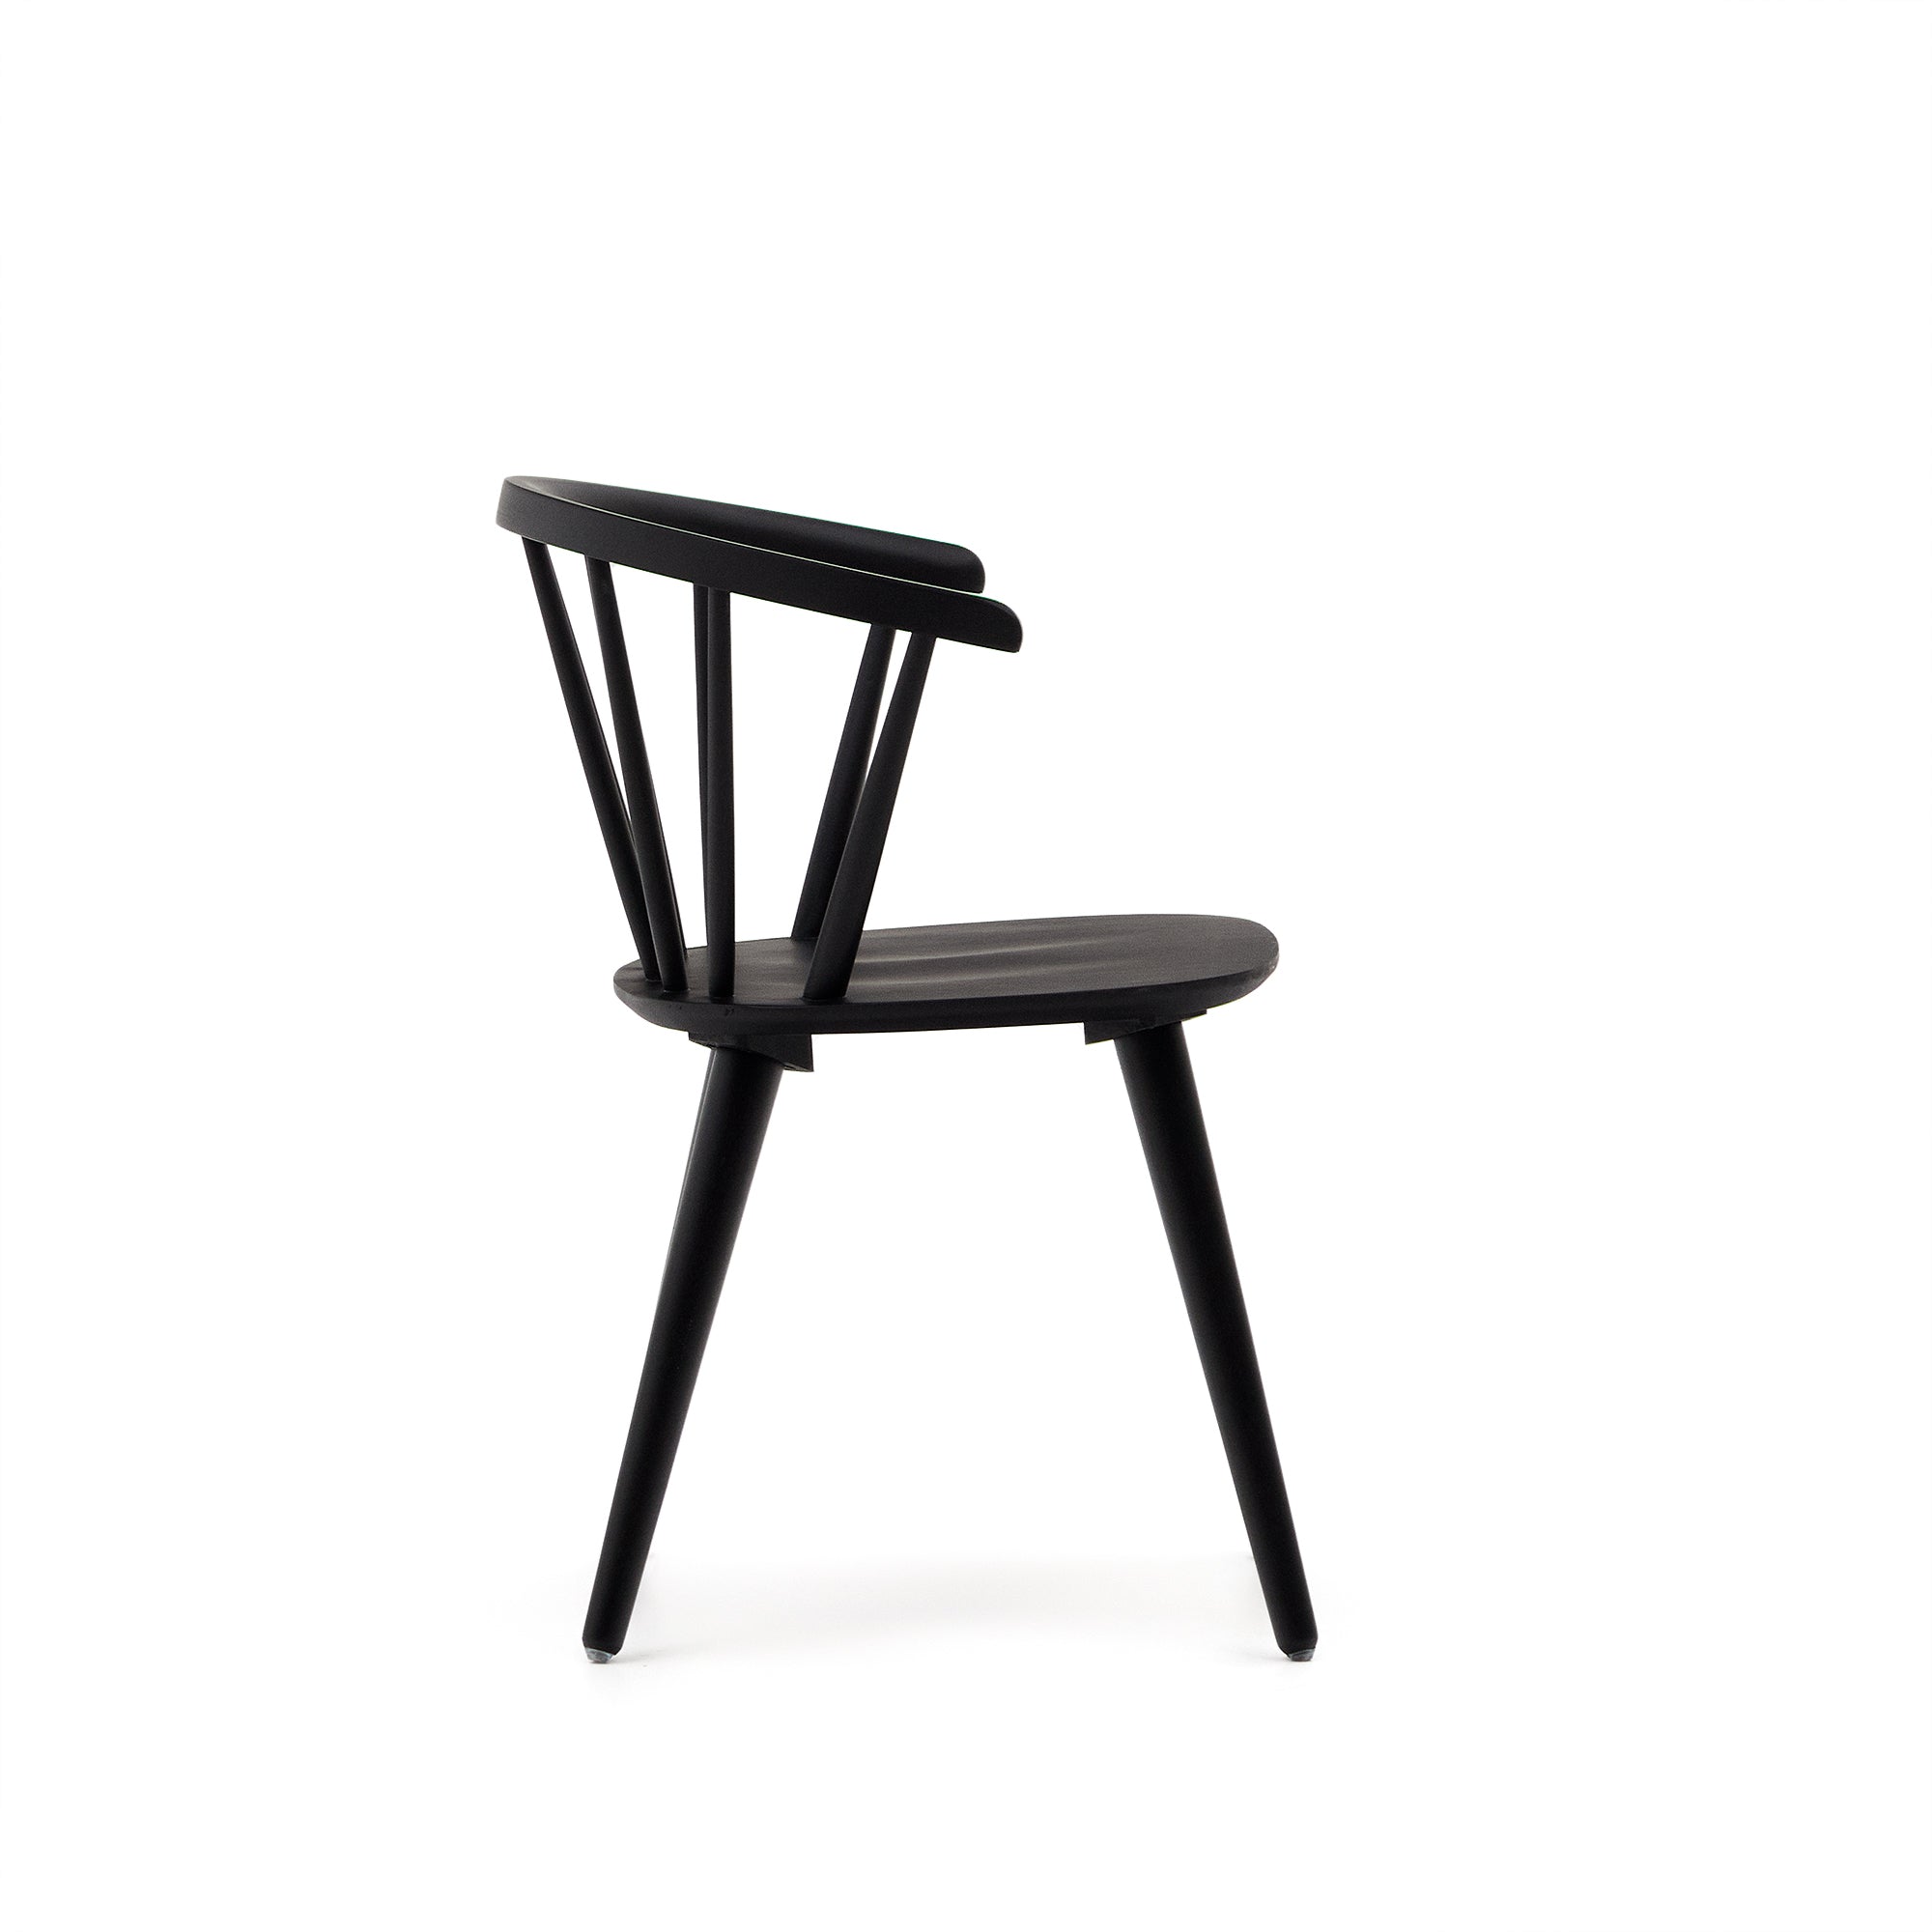 Trise MDF and solid rubber wood chair with black lacquer